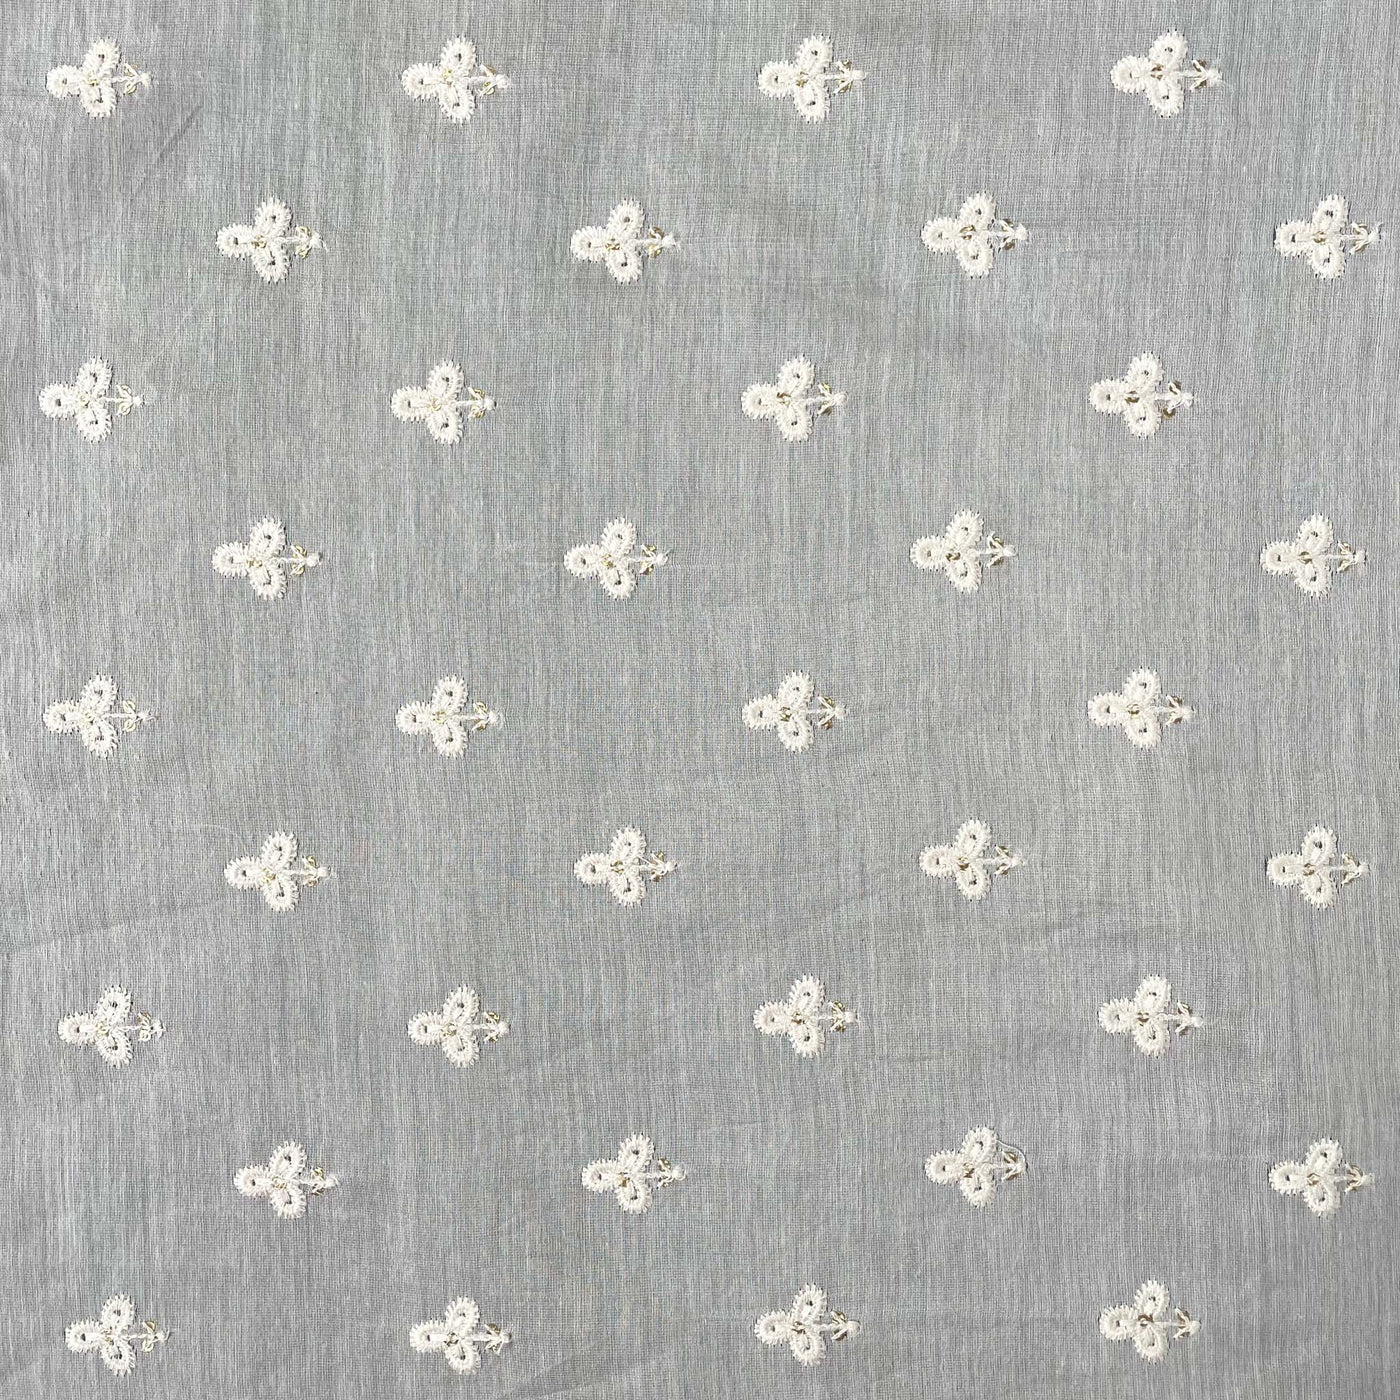 Fabric Pandit Cut Piece (CUT PIECE) White Dyeable Floral Patti Embroidered Pure Chanderi Fabric (Width 44 Inches)